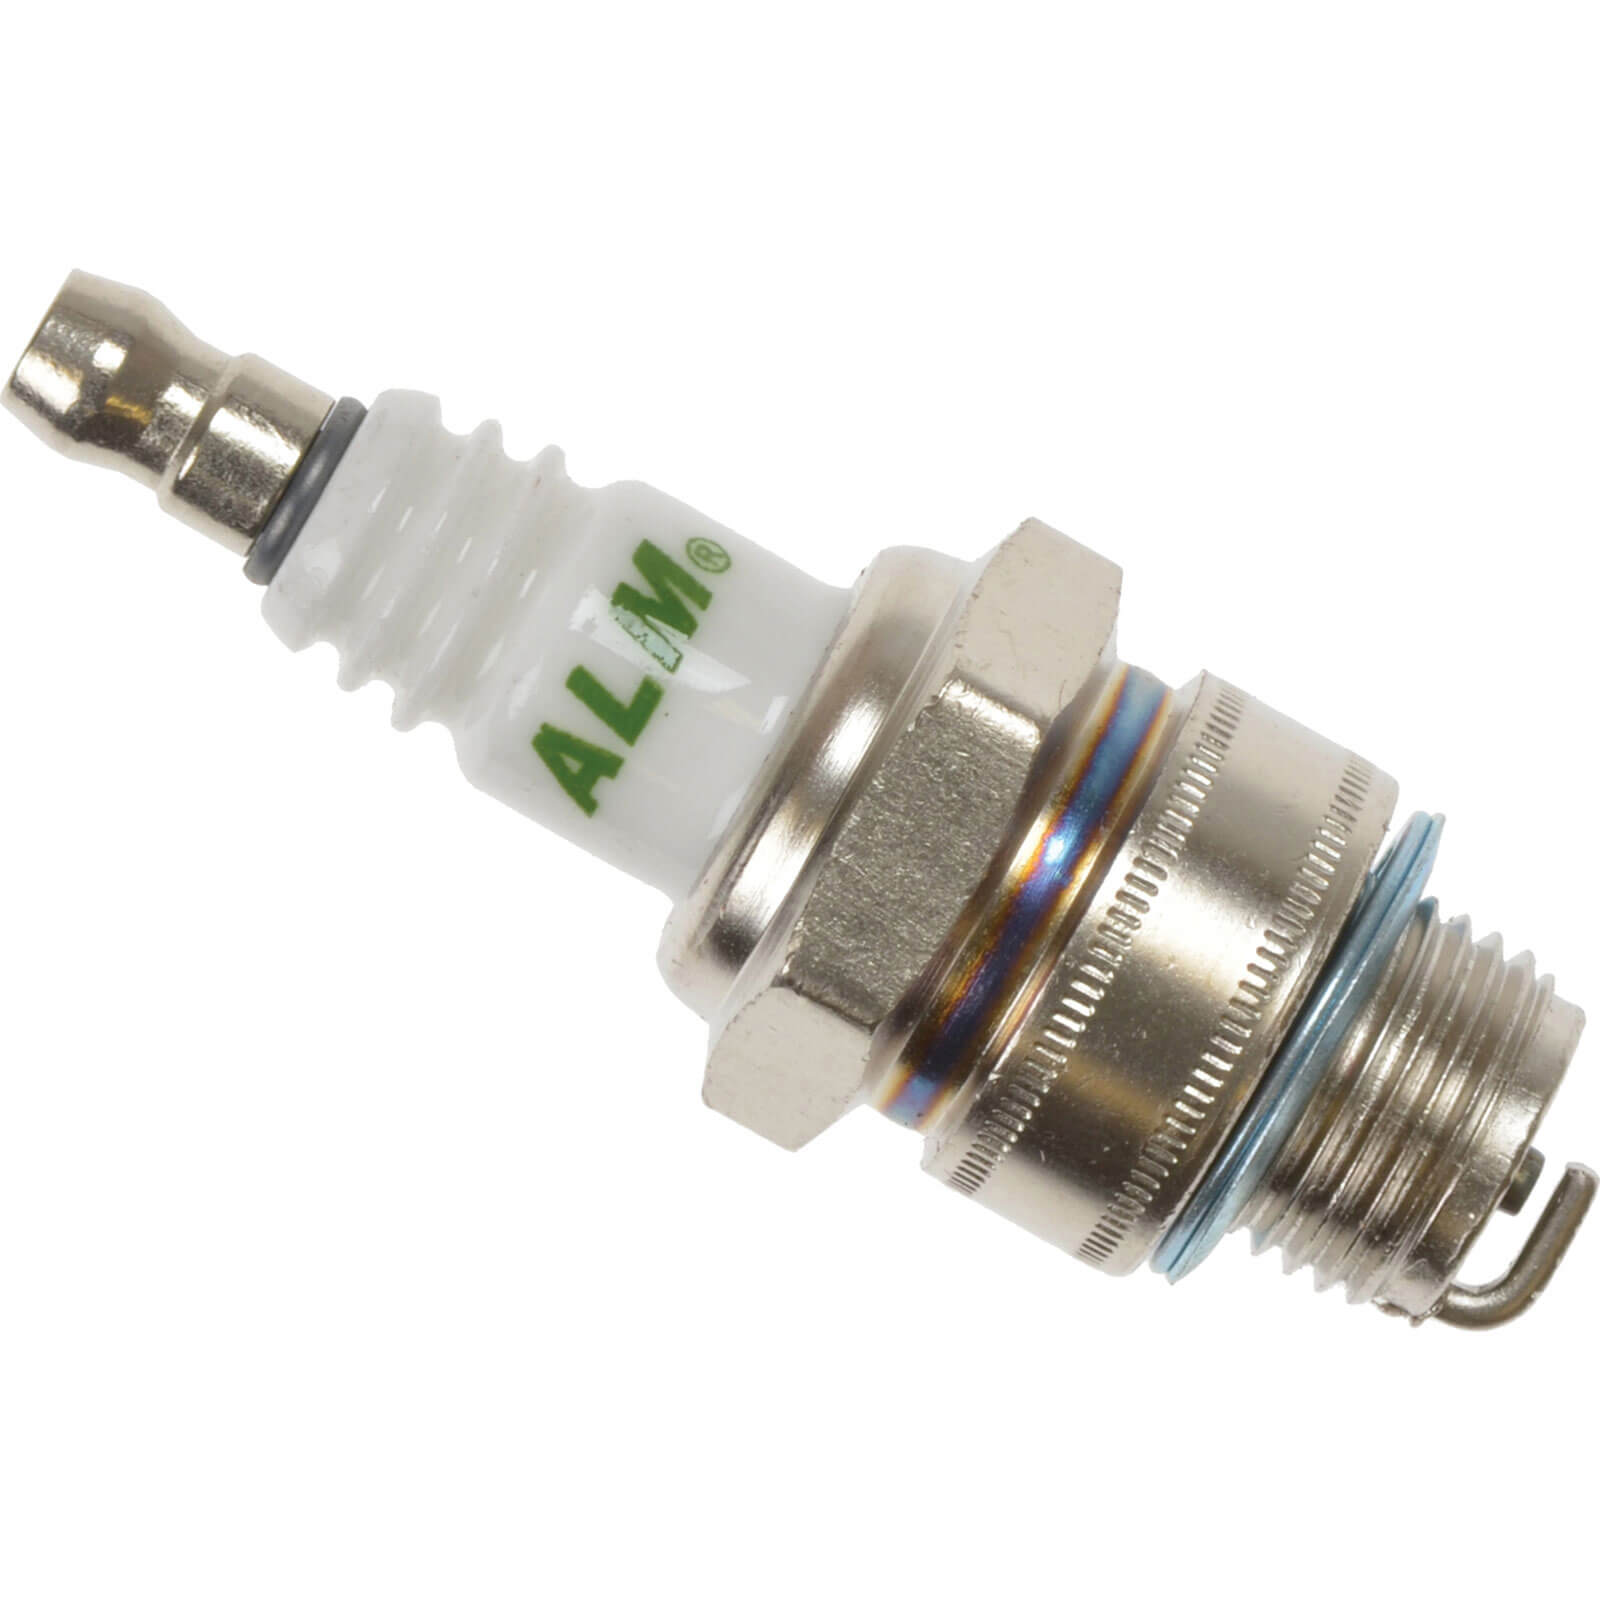 ALM Manufacturing J17LM Spark Plug Fits Most Lawnmowers